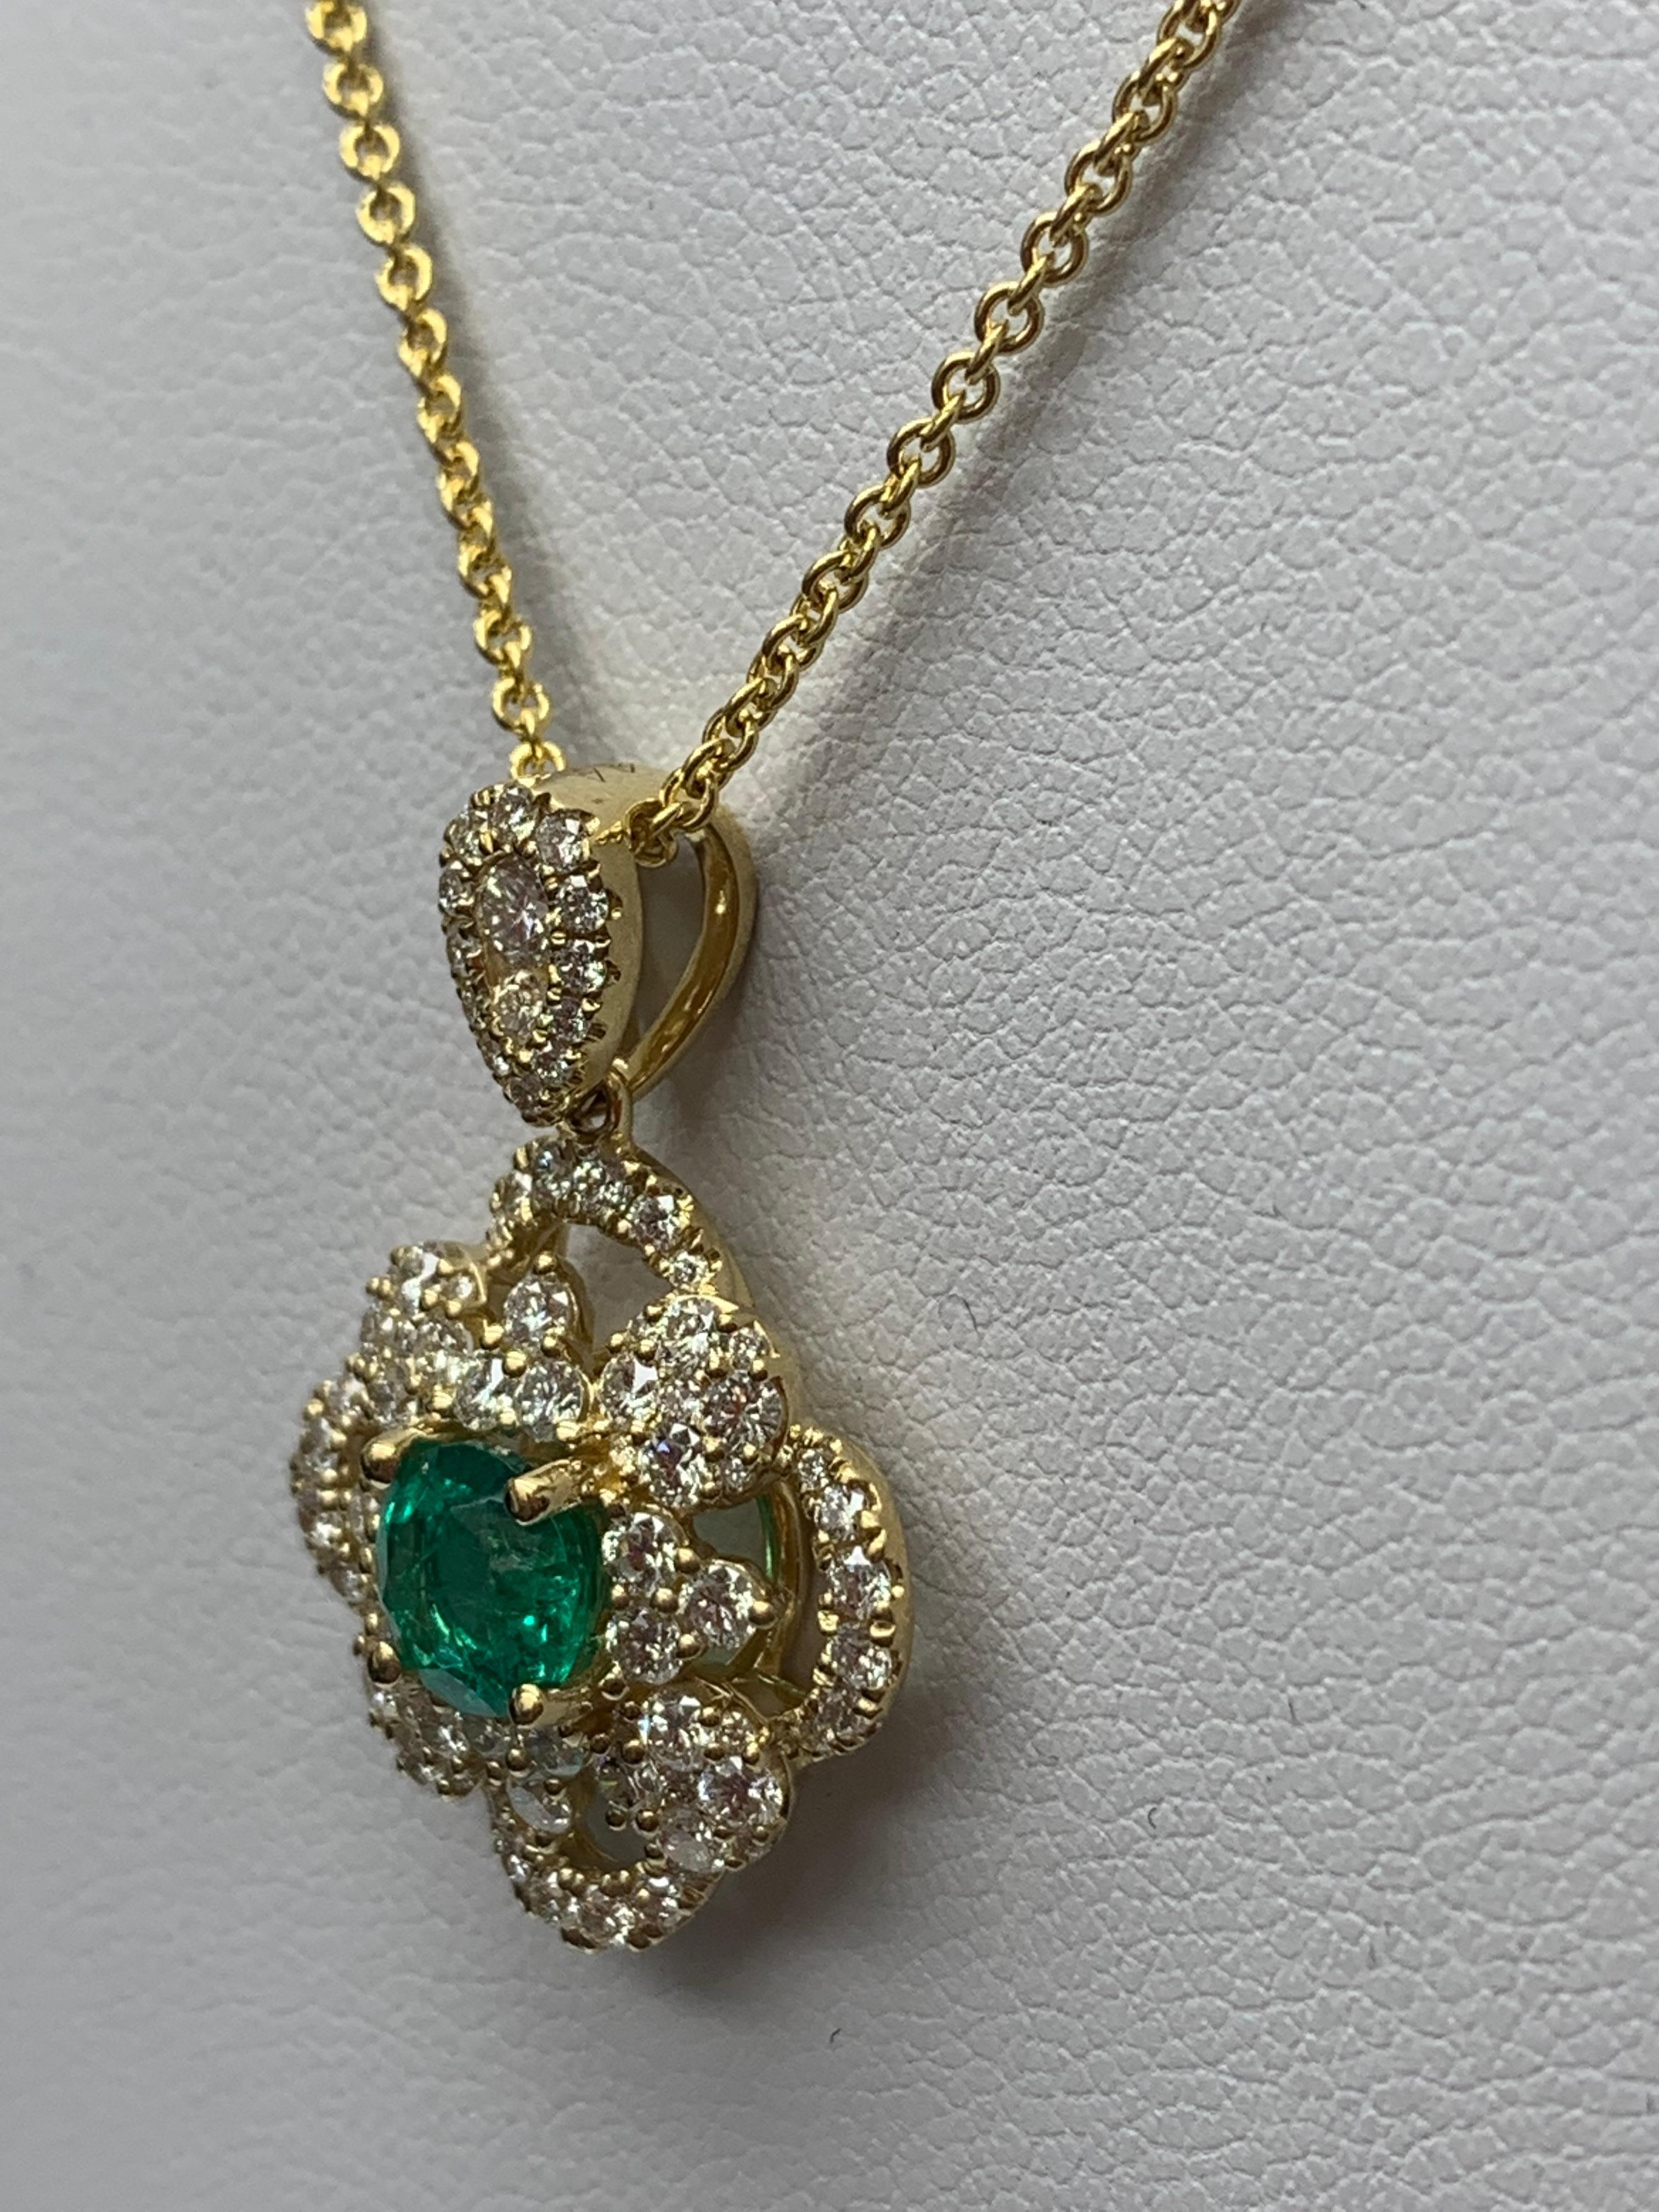 0.67 Carat Round Cut Emerald and Diamond Pendant Necklace in 18K Yellow Gold For Sale 2